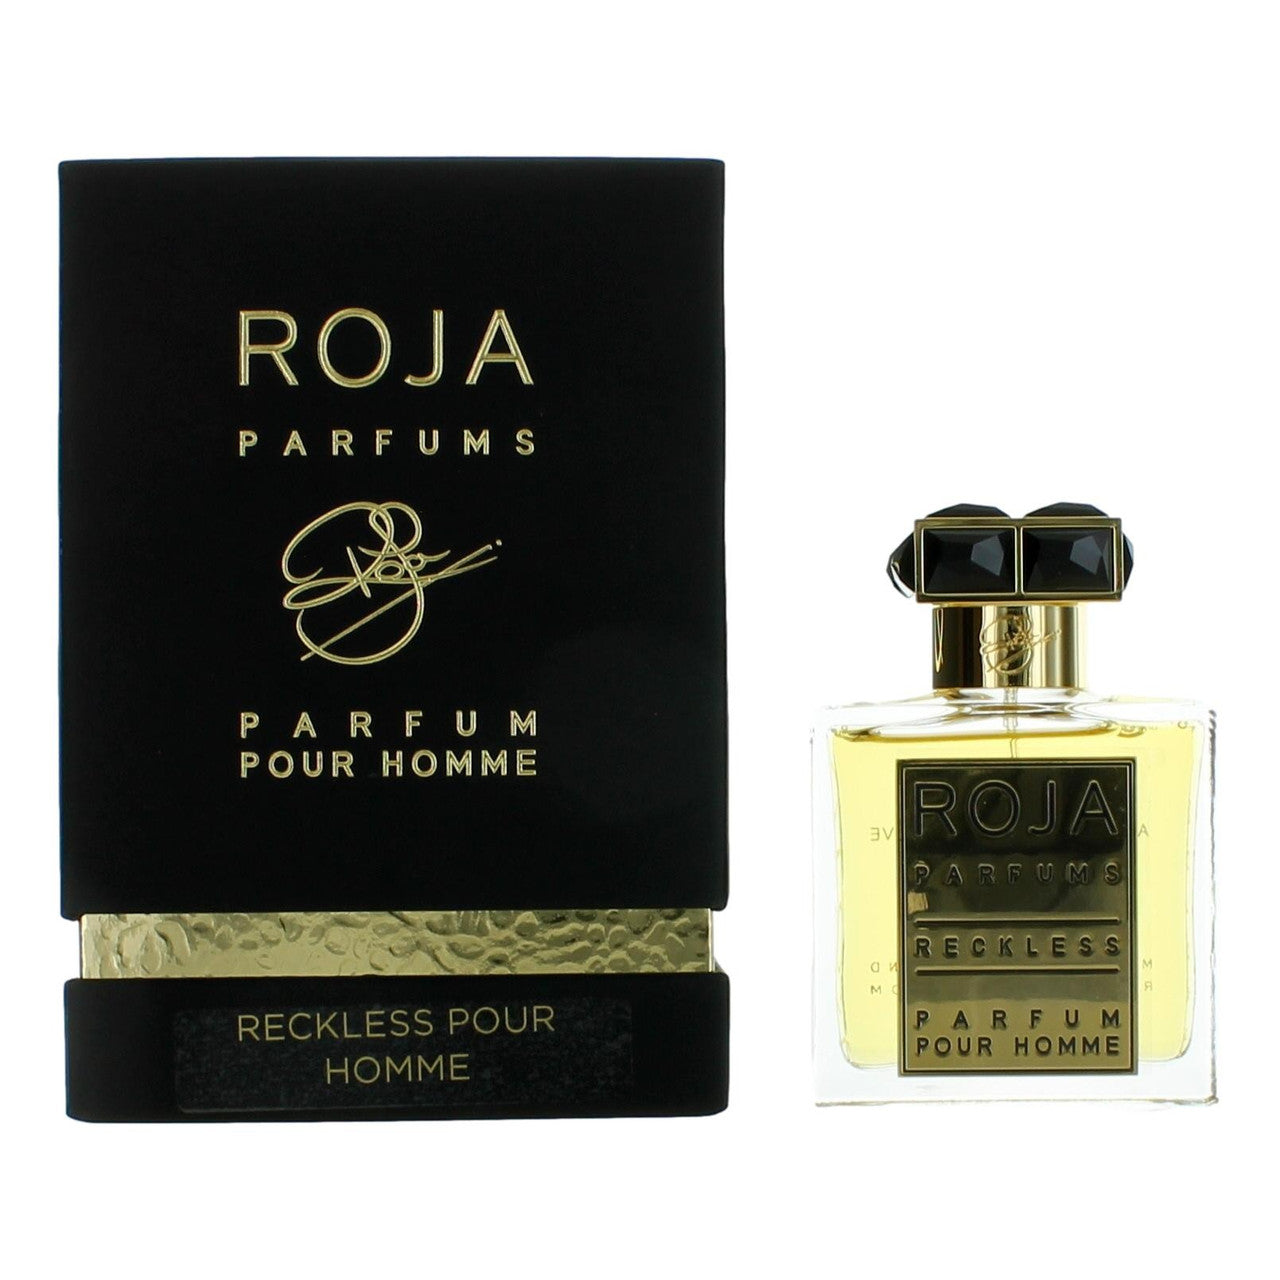 1.7 oz bottle of Reckless Pour Homme by Roja Parfums